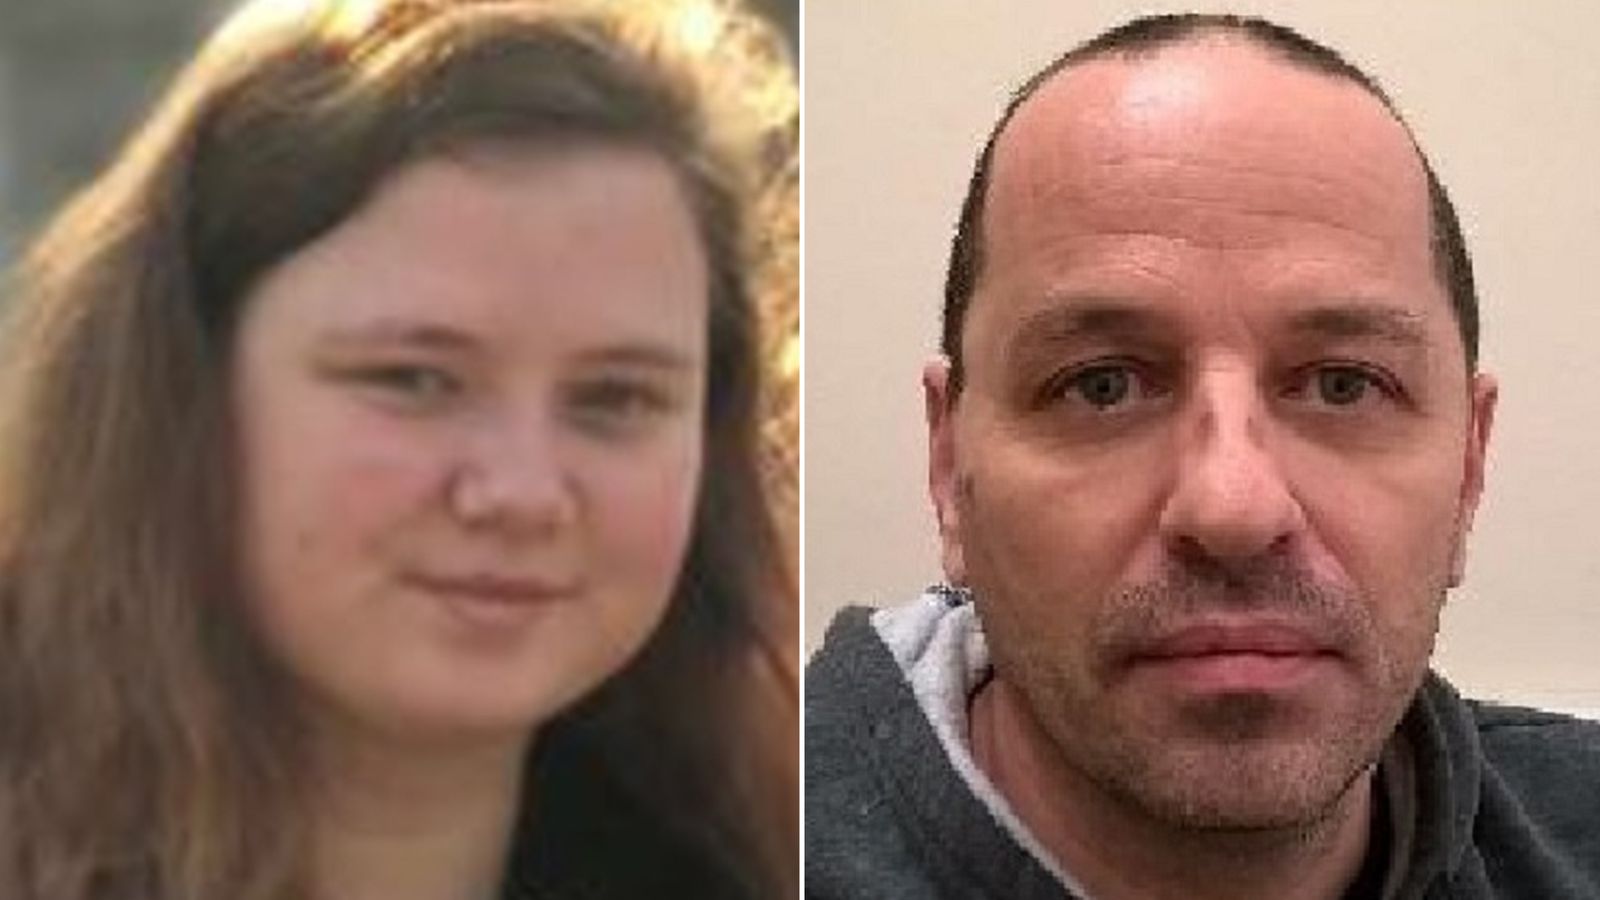 Leah Croucher murder inquiry: Convicted sex offender Neil Maxwell who killed himself is named as prime suspect